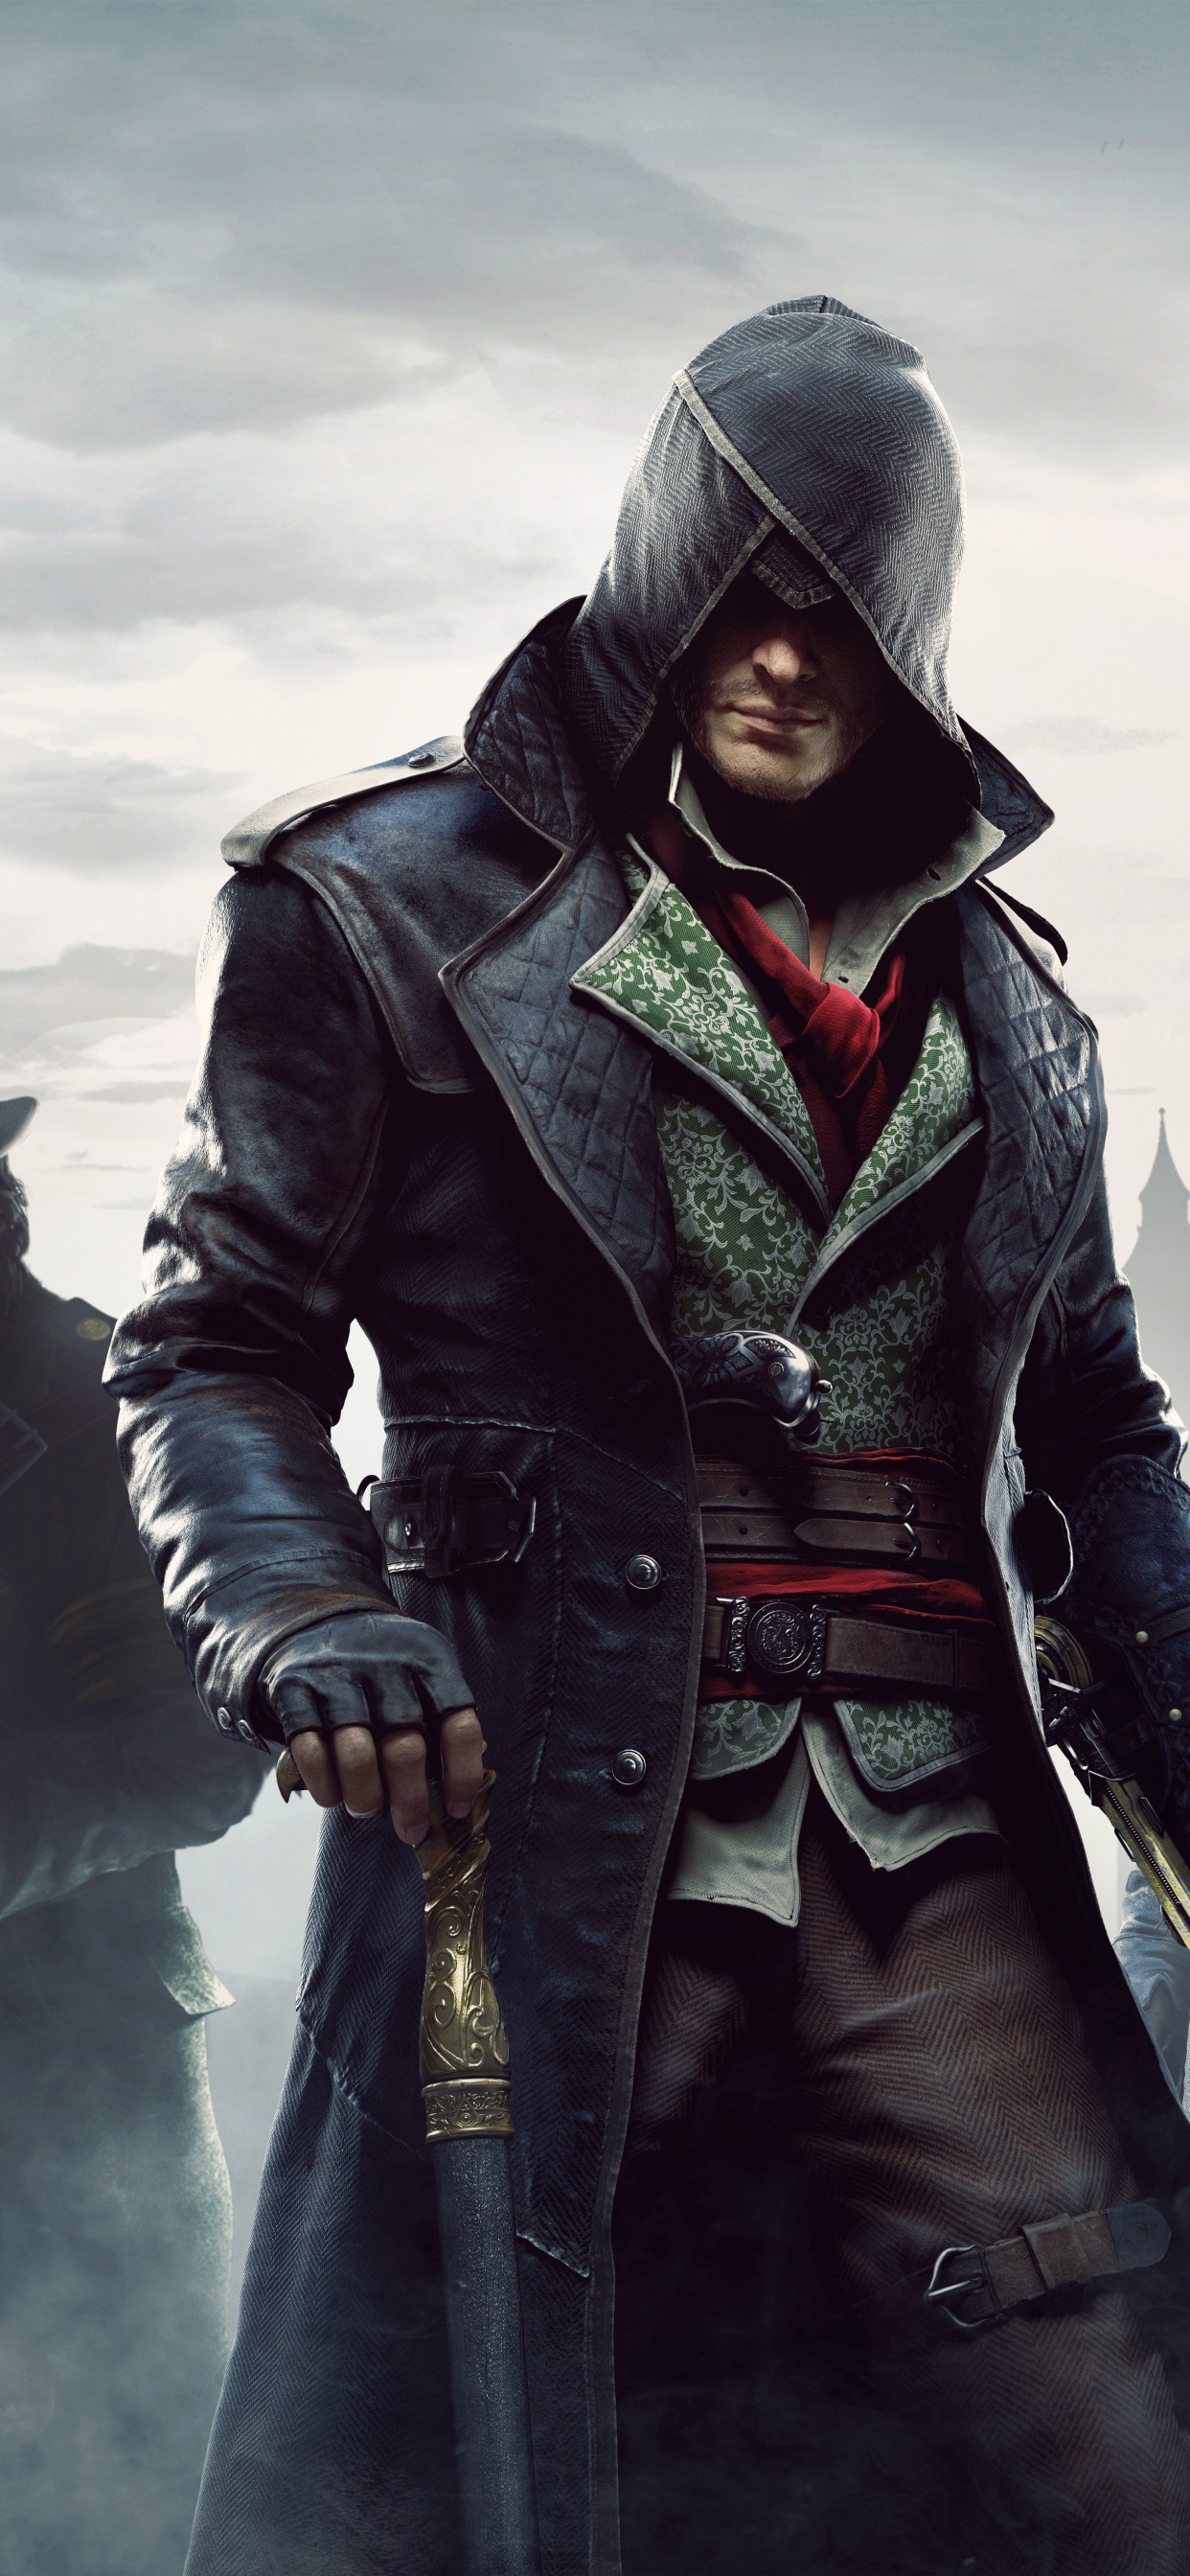 Assassins Creed Syndicate, Ubisoft, pc Game, Film, Assassins Creed Unity. Wallpaper in 1242x2688 Resolution